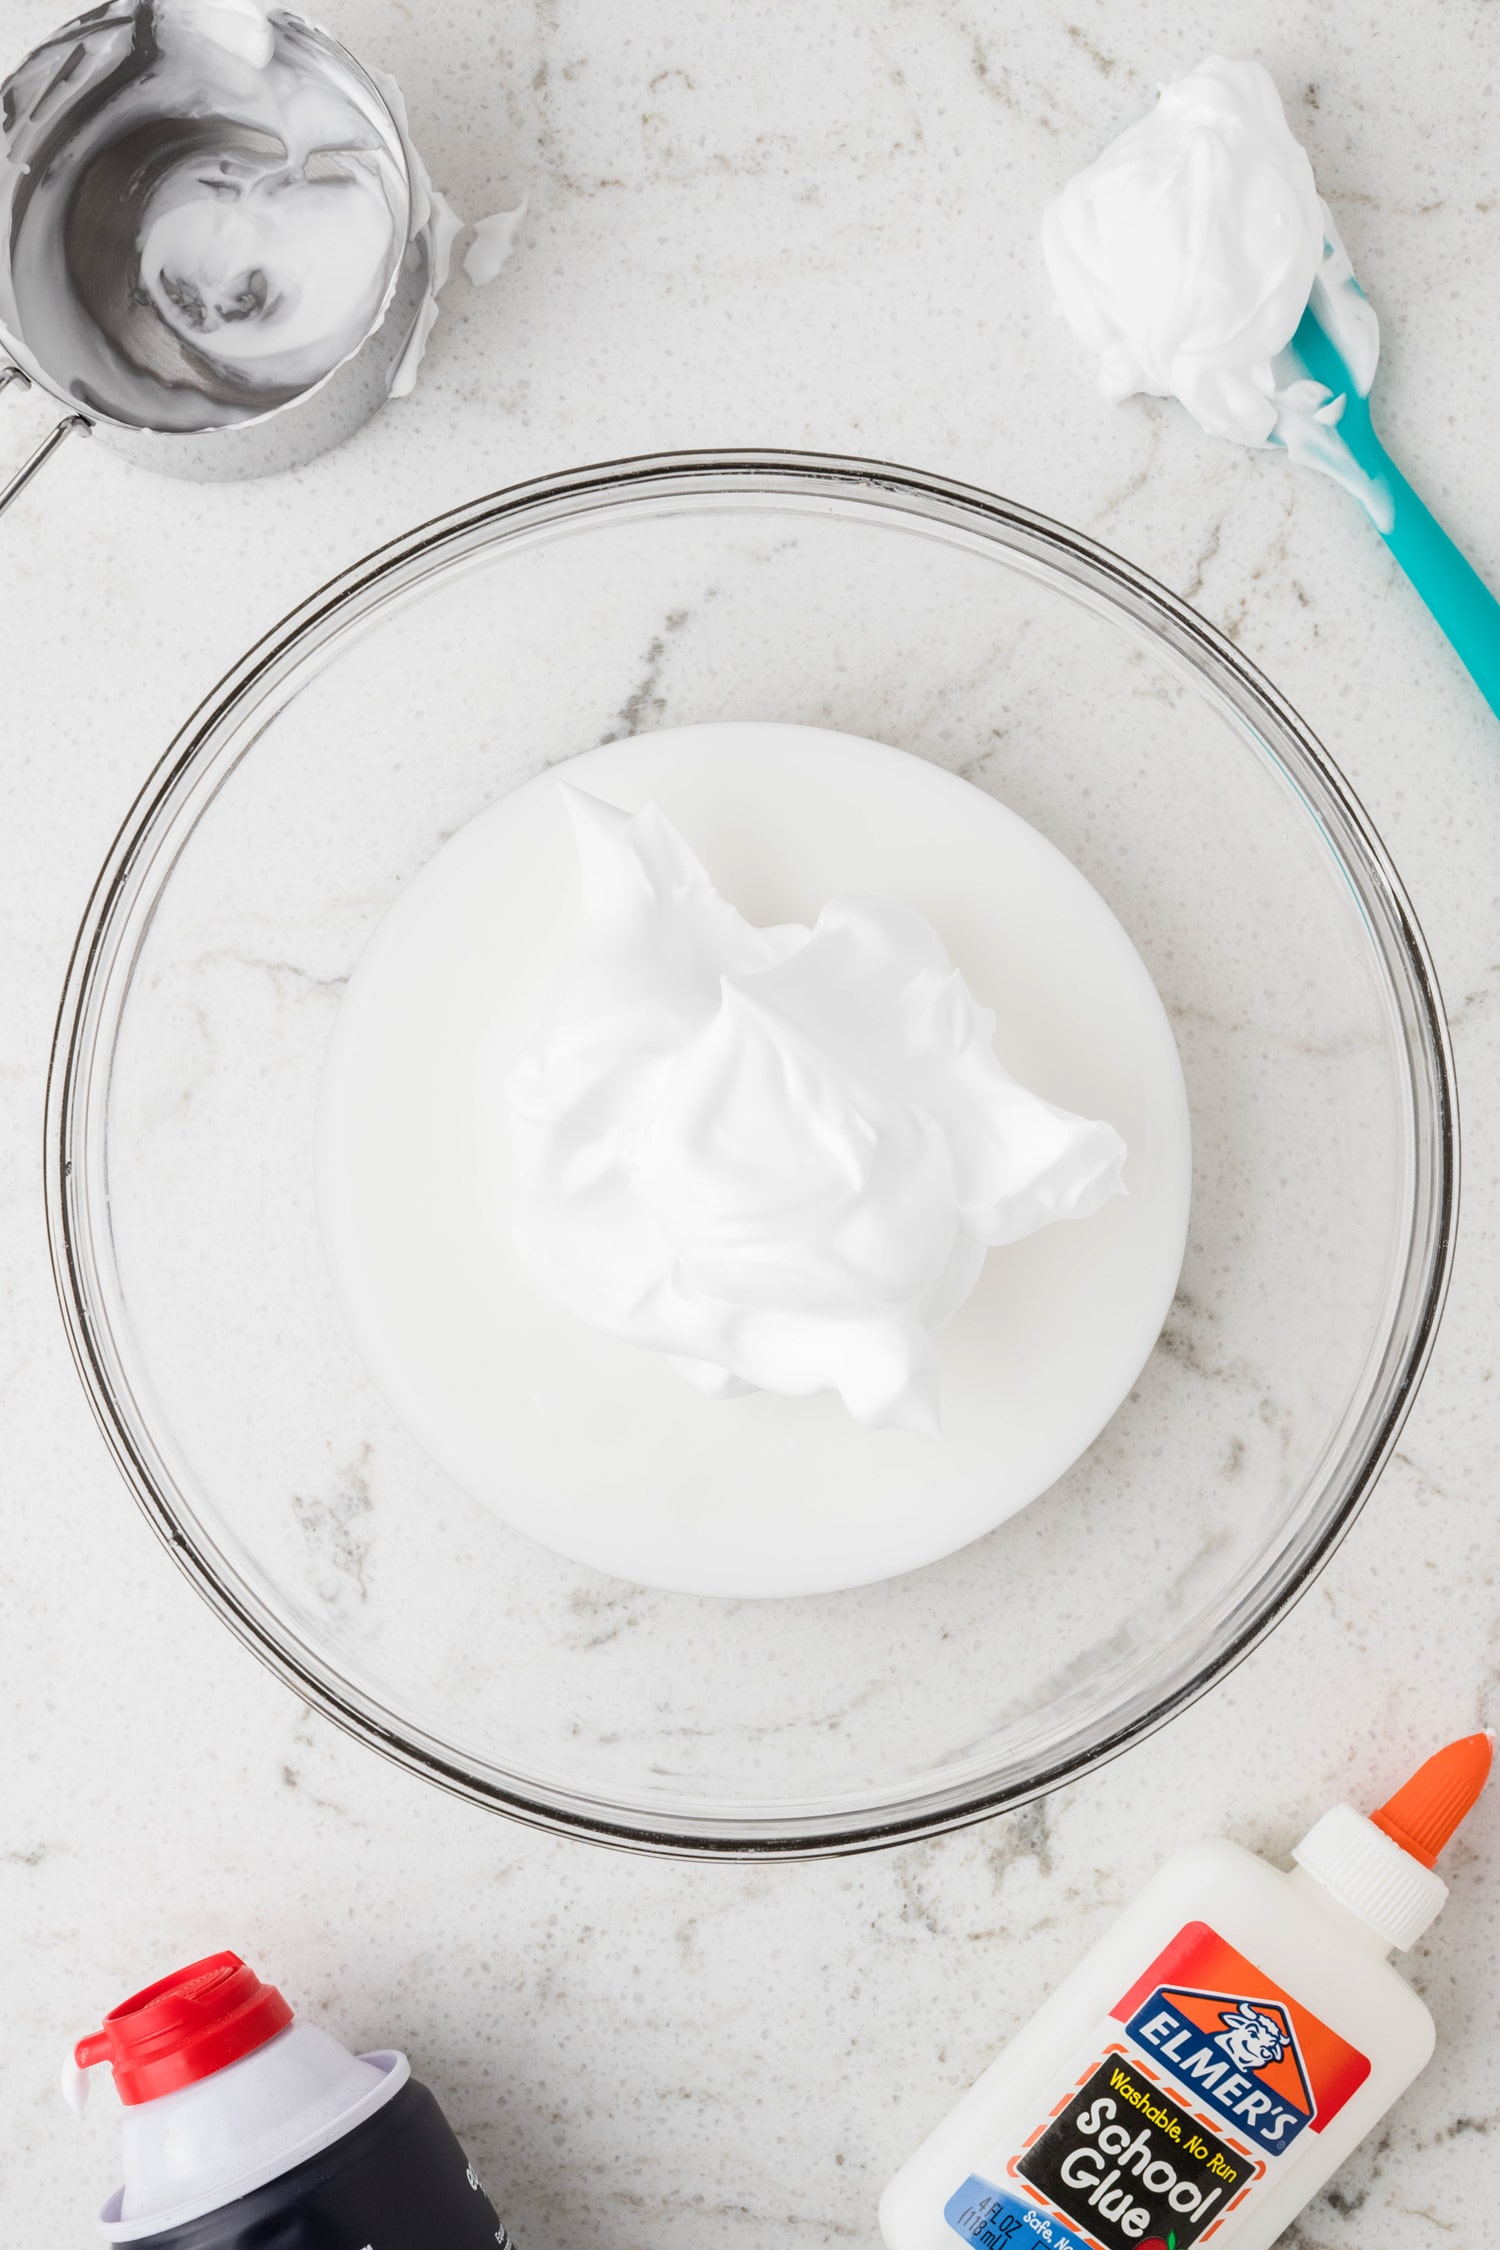 Mix the White School glue and shaving cream until combined.